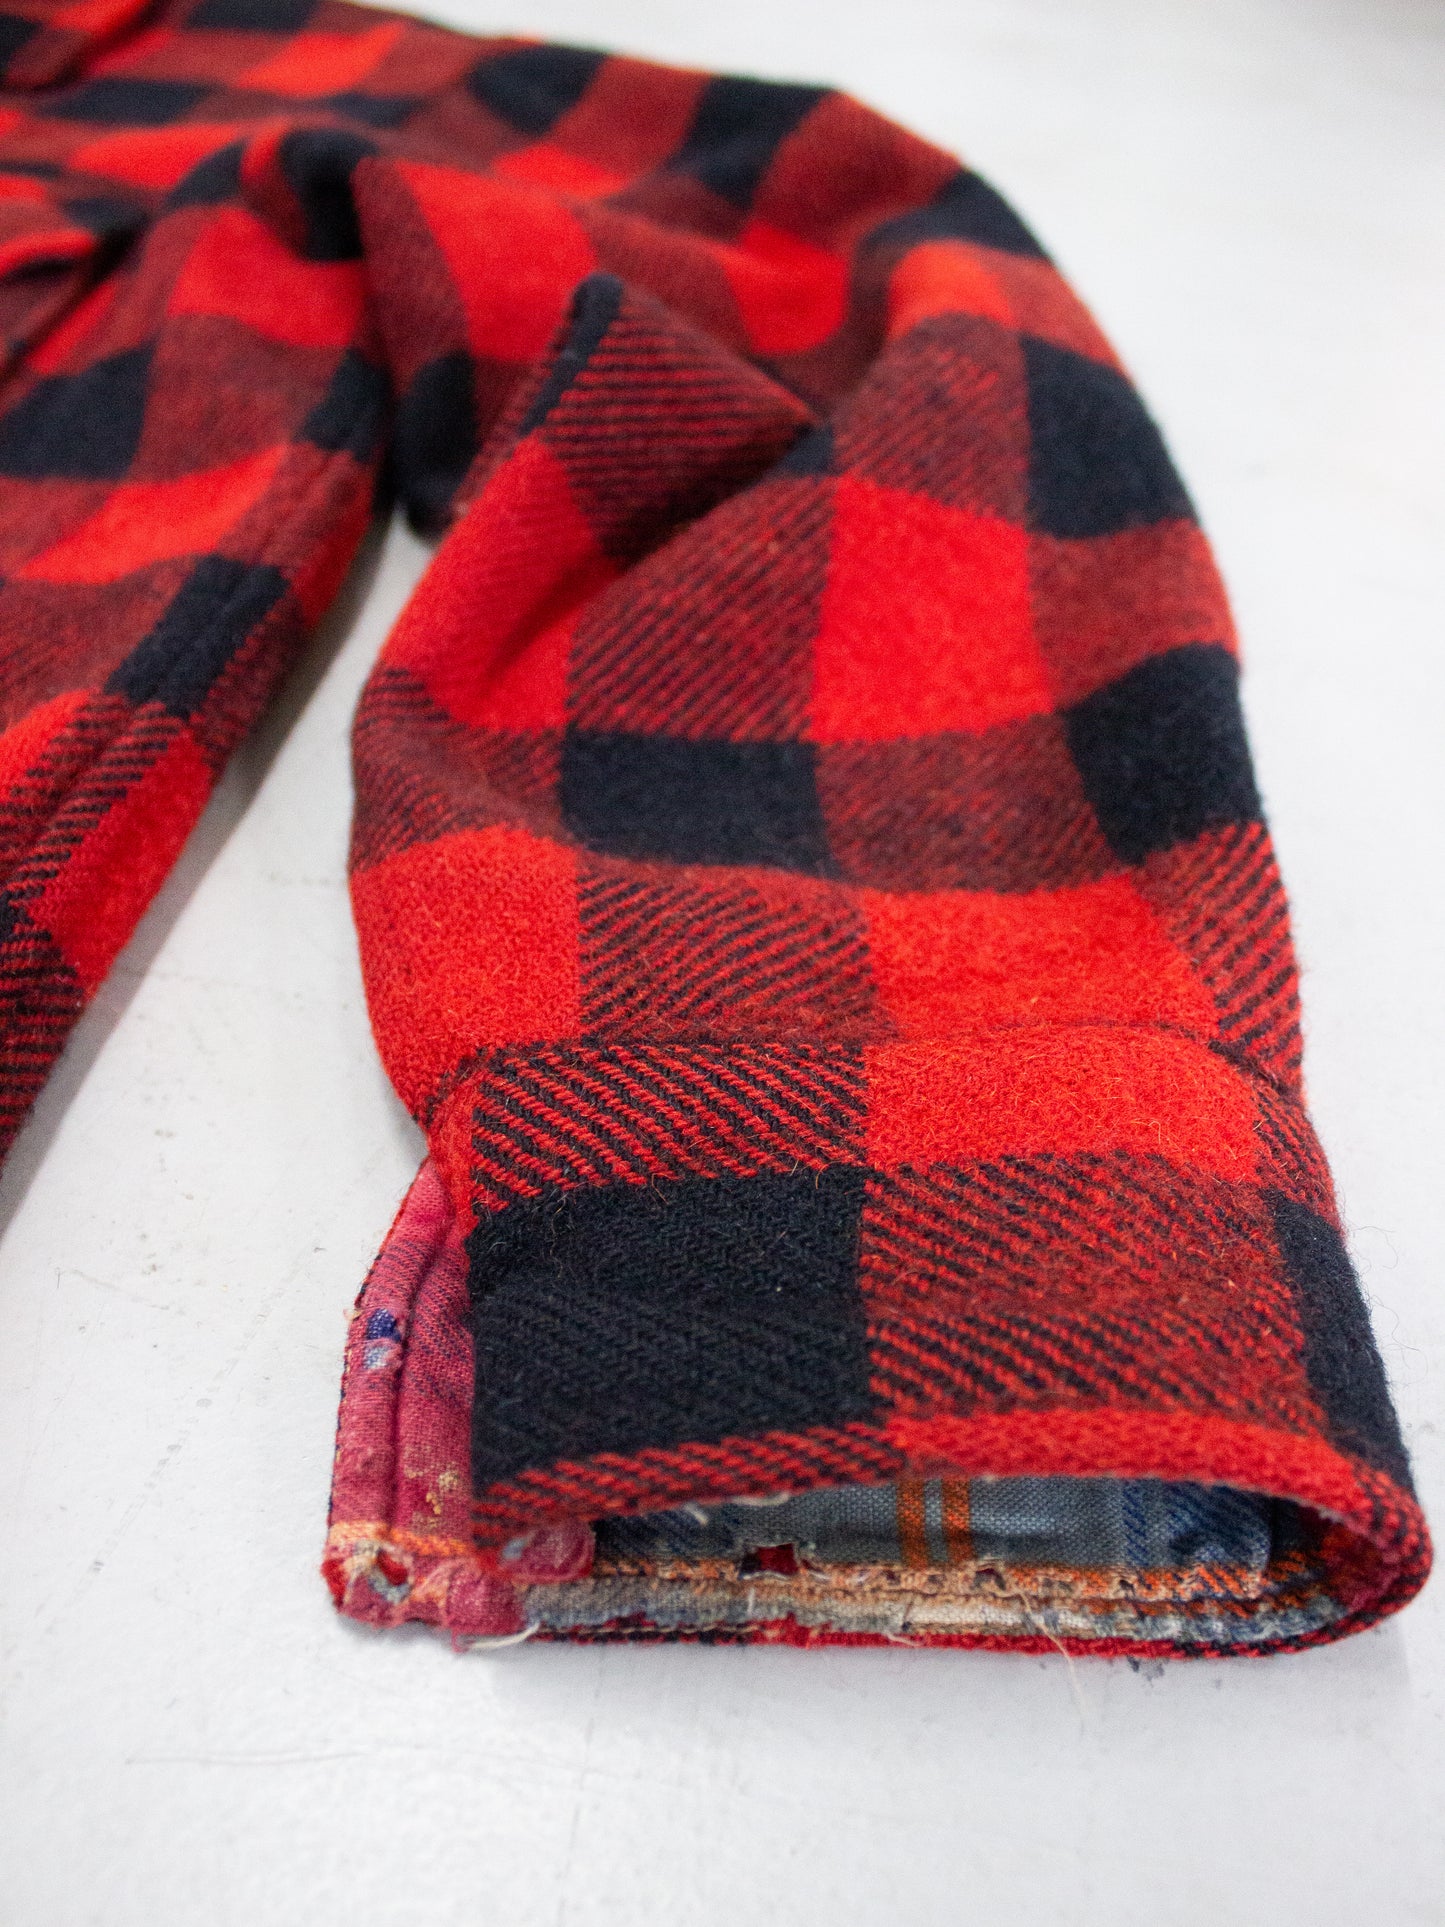 1970's Cockatoo Red Buffalo Plaid Wool Flannel (Large)